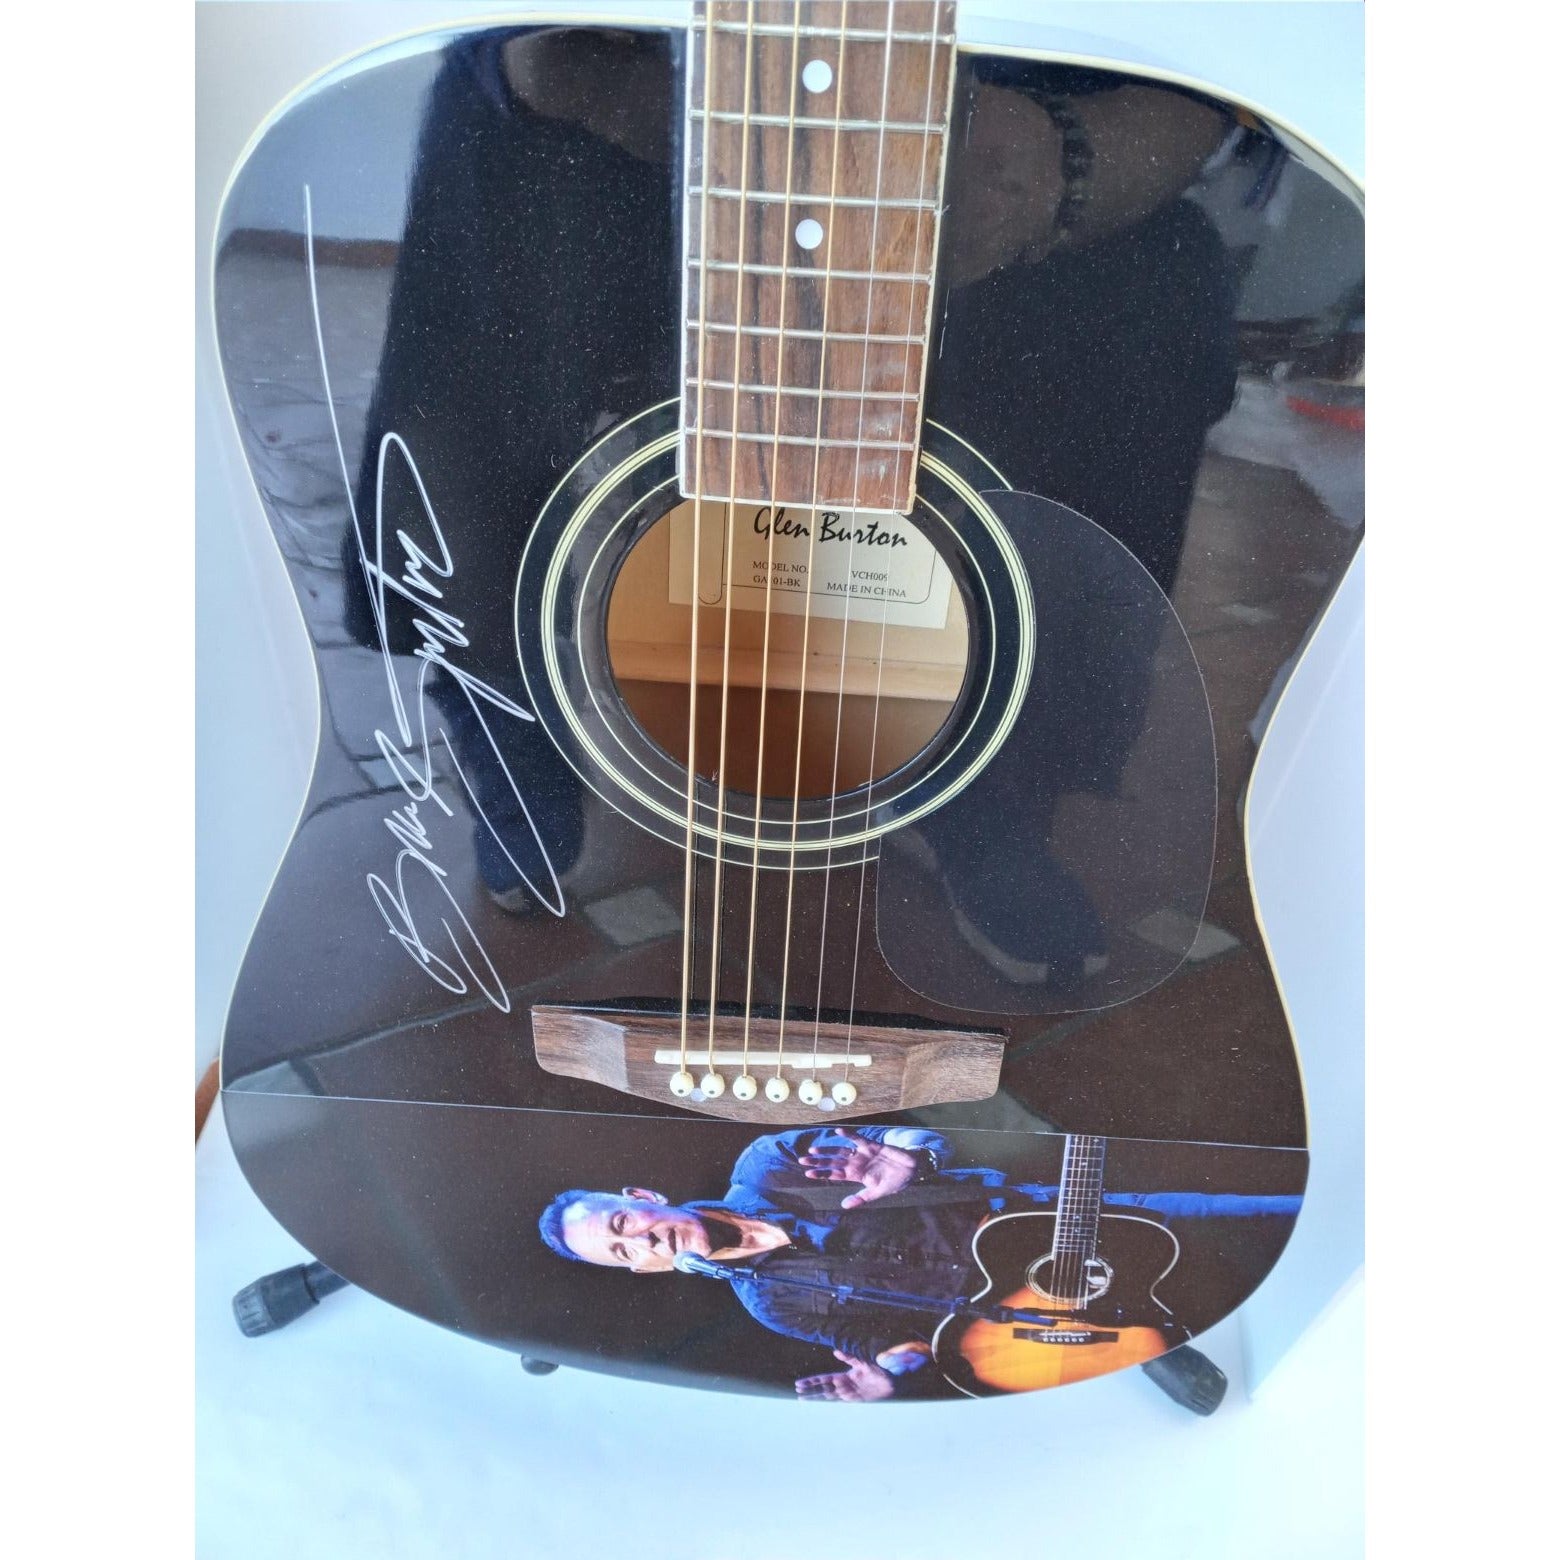 Bruce Springsteen Glen Burton full size acoustic guitar signed with proof